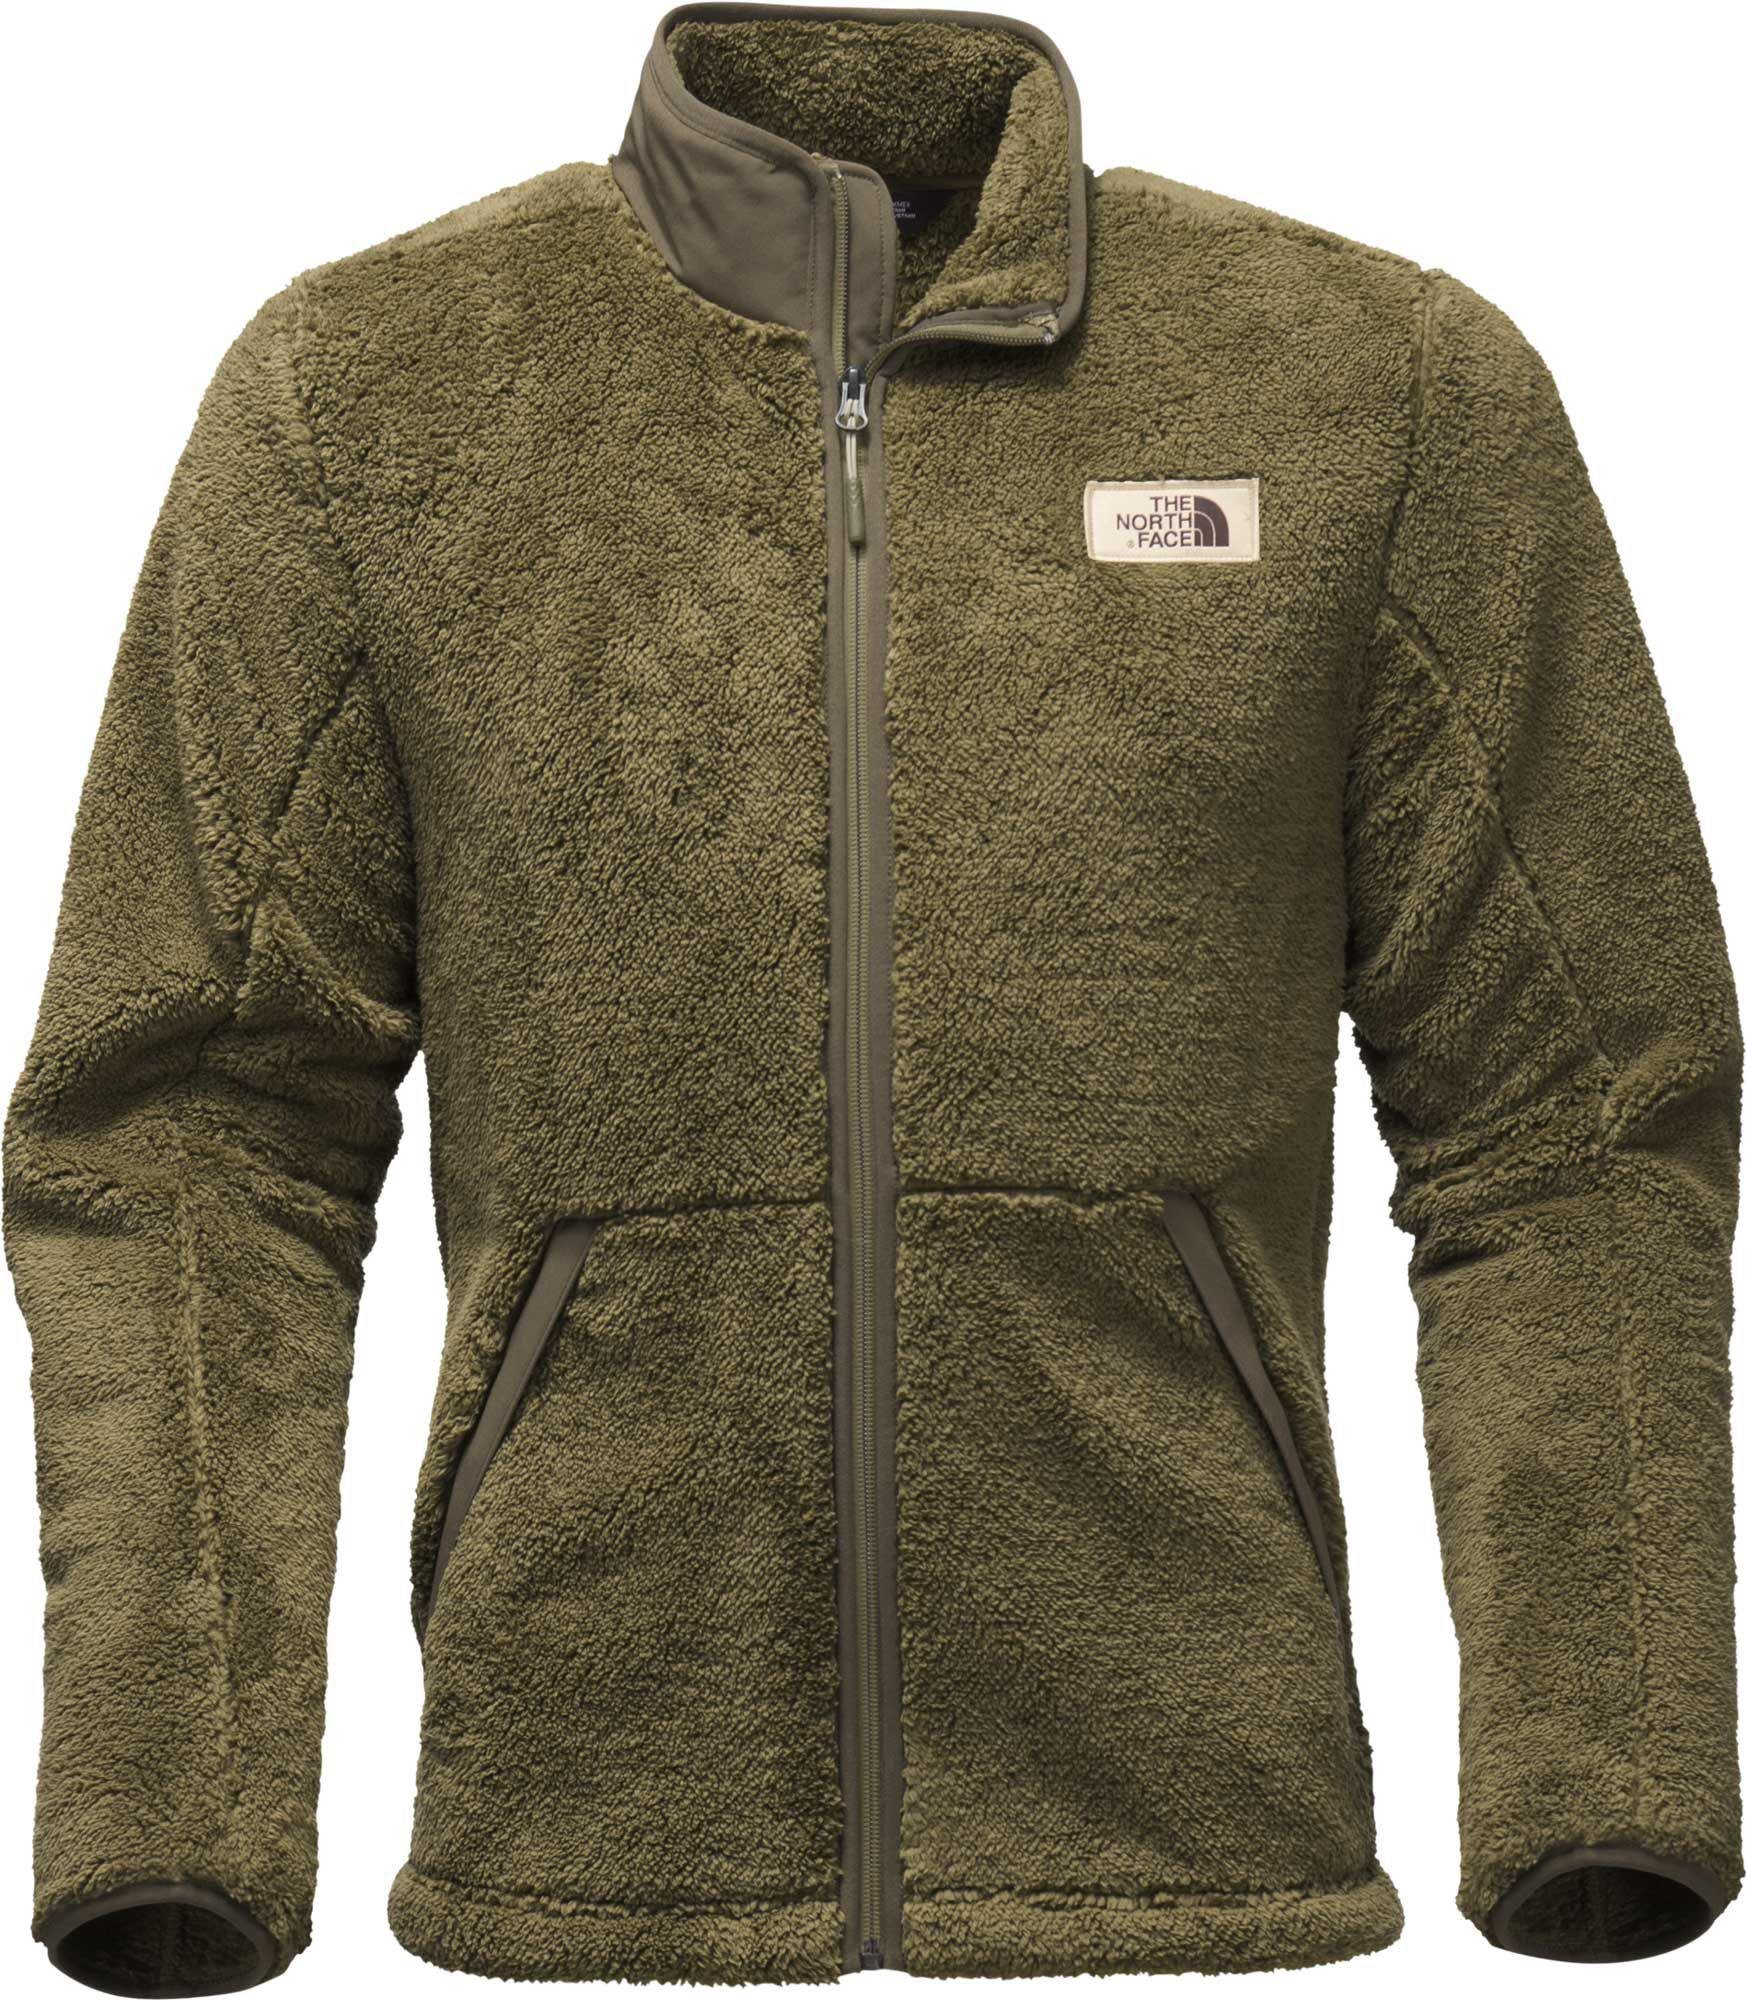 Lyst - The North Face Campshire Full Zip Fleece Jacket in Green for Men